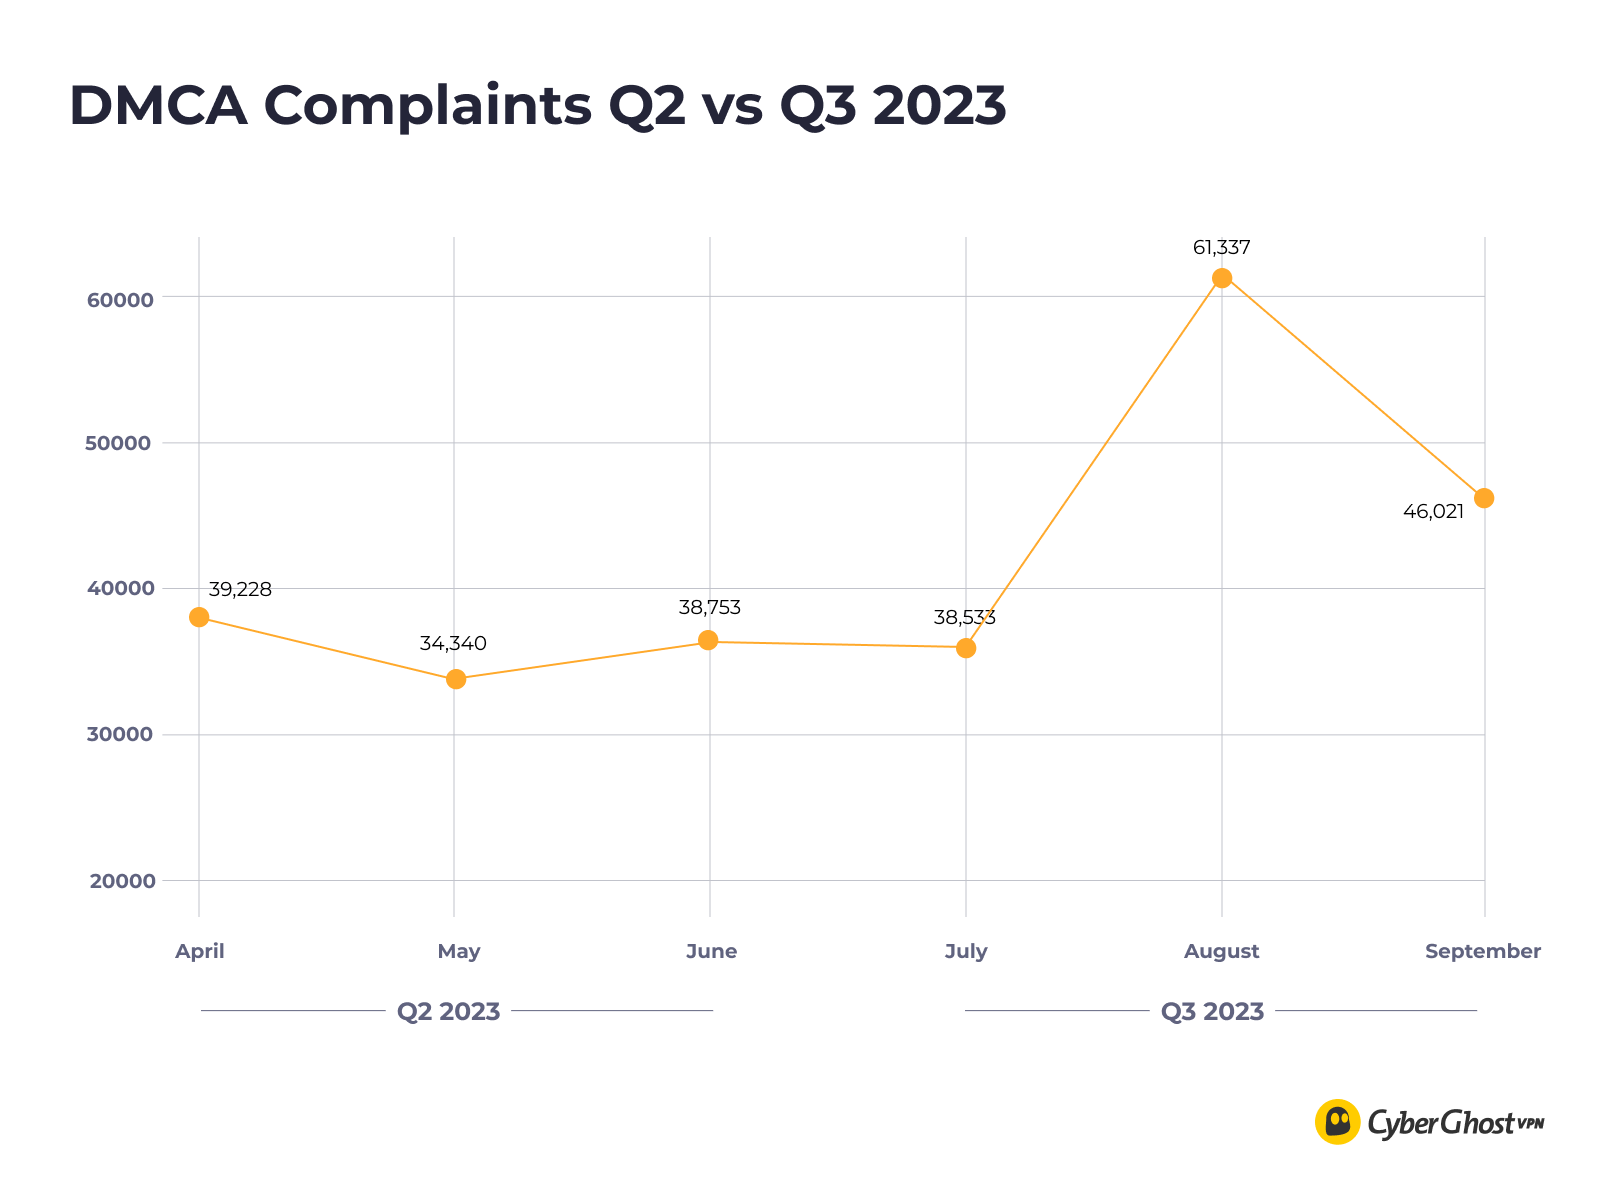 CyberGhost VPN's Quarterly Transparency Report numbers for DMCA complaints Q3 2023